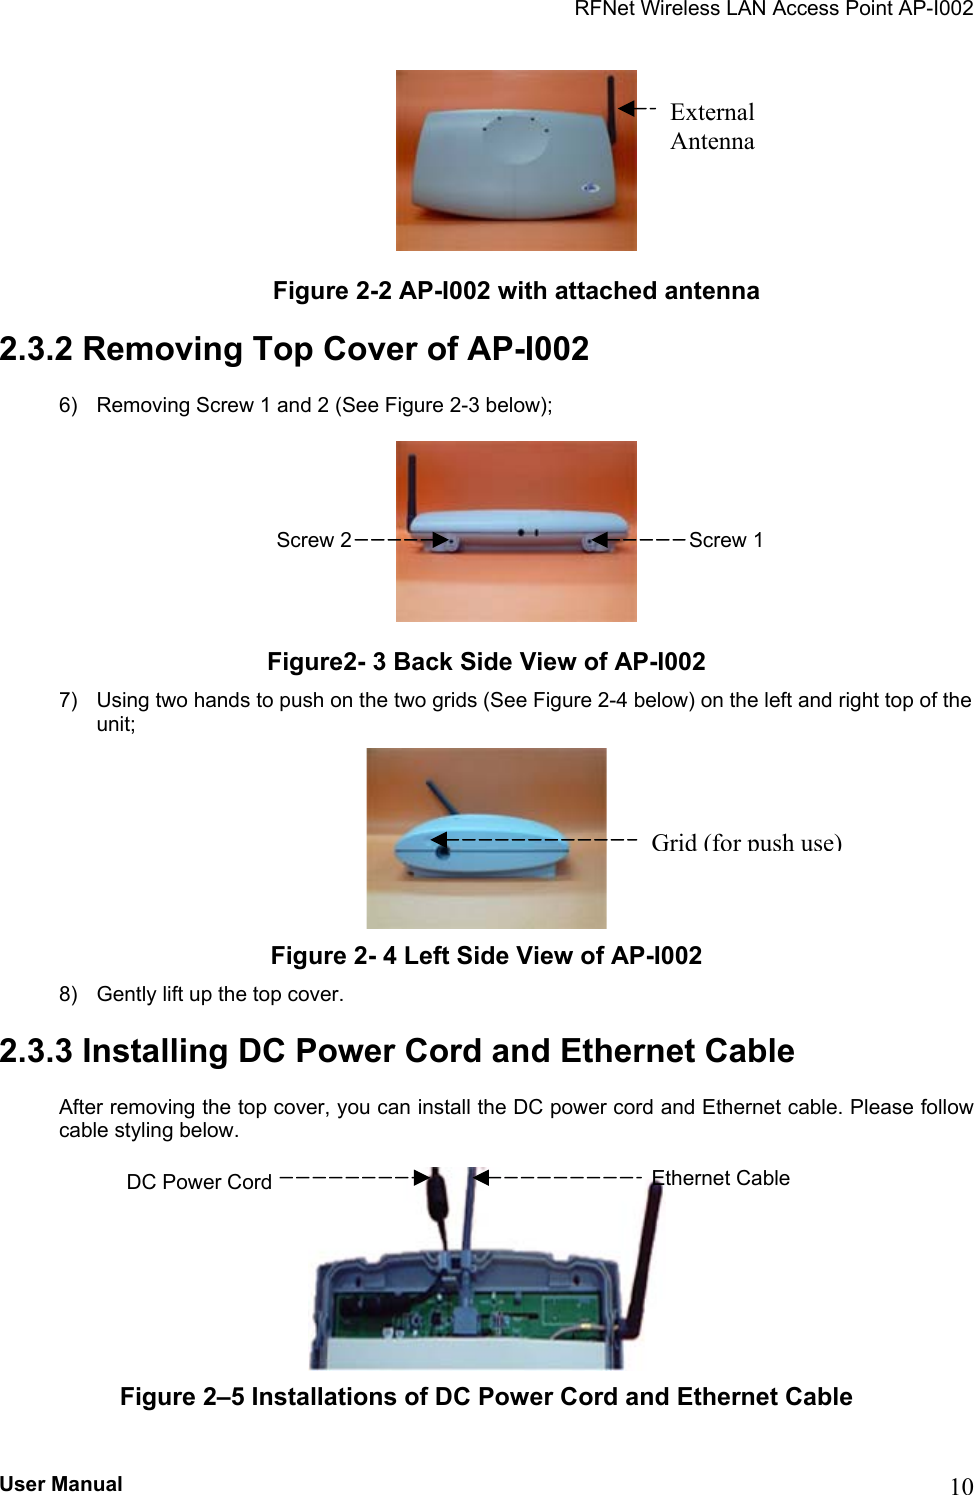 RFNet Wireless LAN Access Point AP-I002  Figure 2-2 AP-I002 with attached antenna 2.3.2 Removing Top Cover of AP-I002 6)  Removing Screw 1 and 2 (See Figure 2-3 below);  Figure2- 3 Back Side View of AP-I002 7)  Using two hands to push on the two grids (See Figure 2-4 below) on the left and right top of the unit;  Figure 2- 4 Left Side View of AP-I002 8)  Gently lift up the top cover. 2.3.3 Installing DC Power Cord and Ethernet Cable After removing the top cover, you can install the DC power cord and Ethernet cable. Please follow cable styling below.  External Antenna Grid (for push use)Screw 2  Screw 1 Ethernet Cable DC Power Cord  Figure 2–5 Installations of DC Power Cord and Ethernet Cable  User Manual  10 